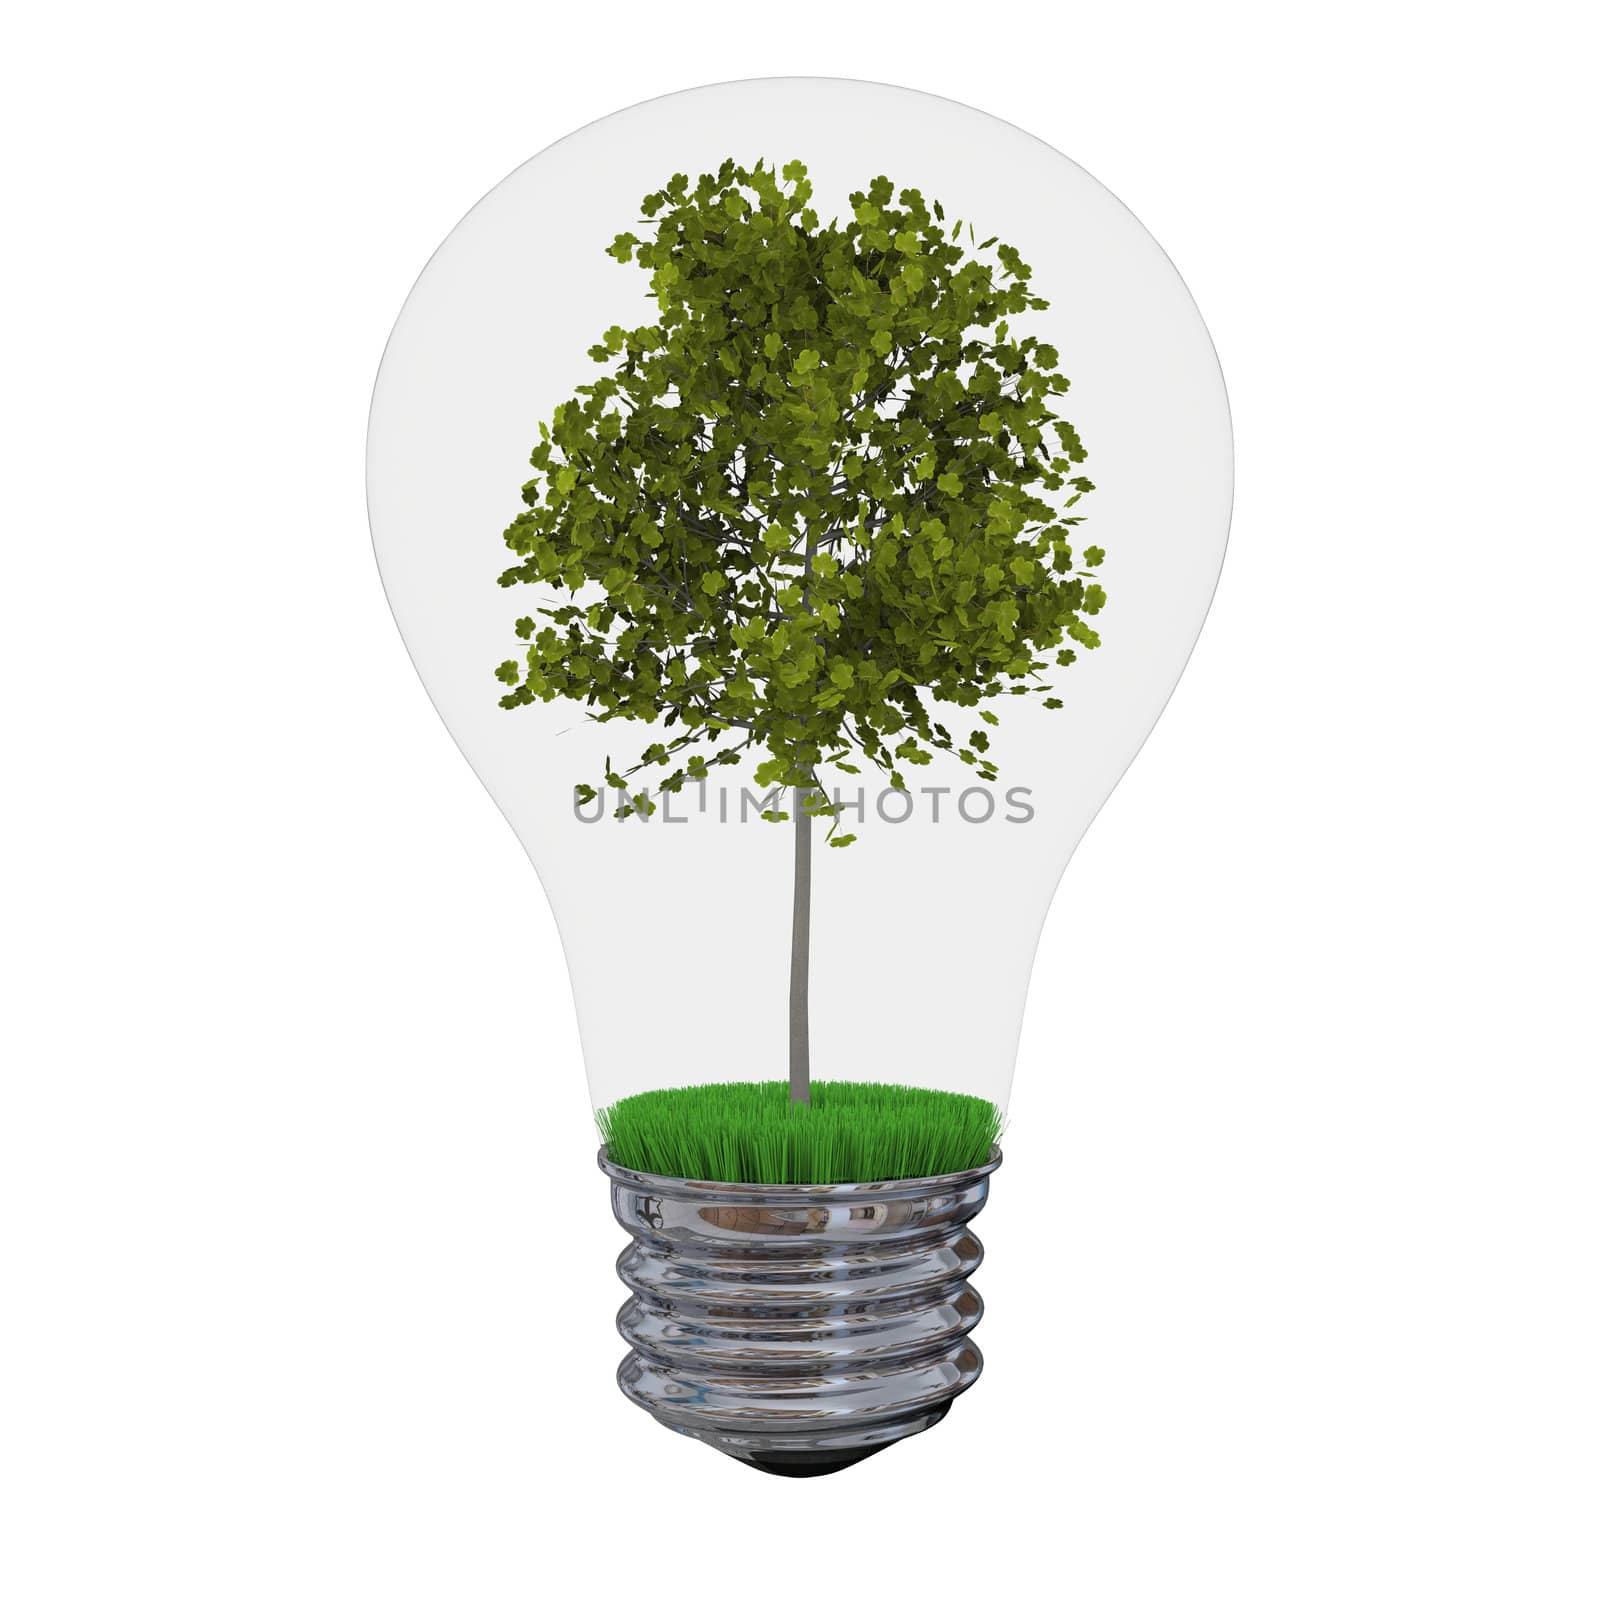 Environmental concept with tree inside lightbulb isolated on white background.